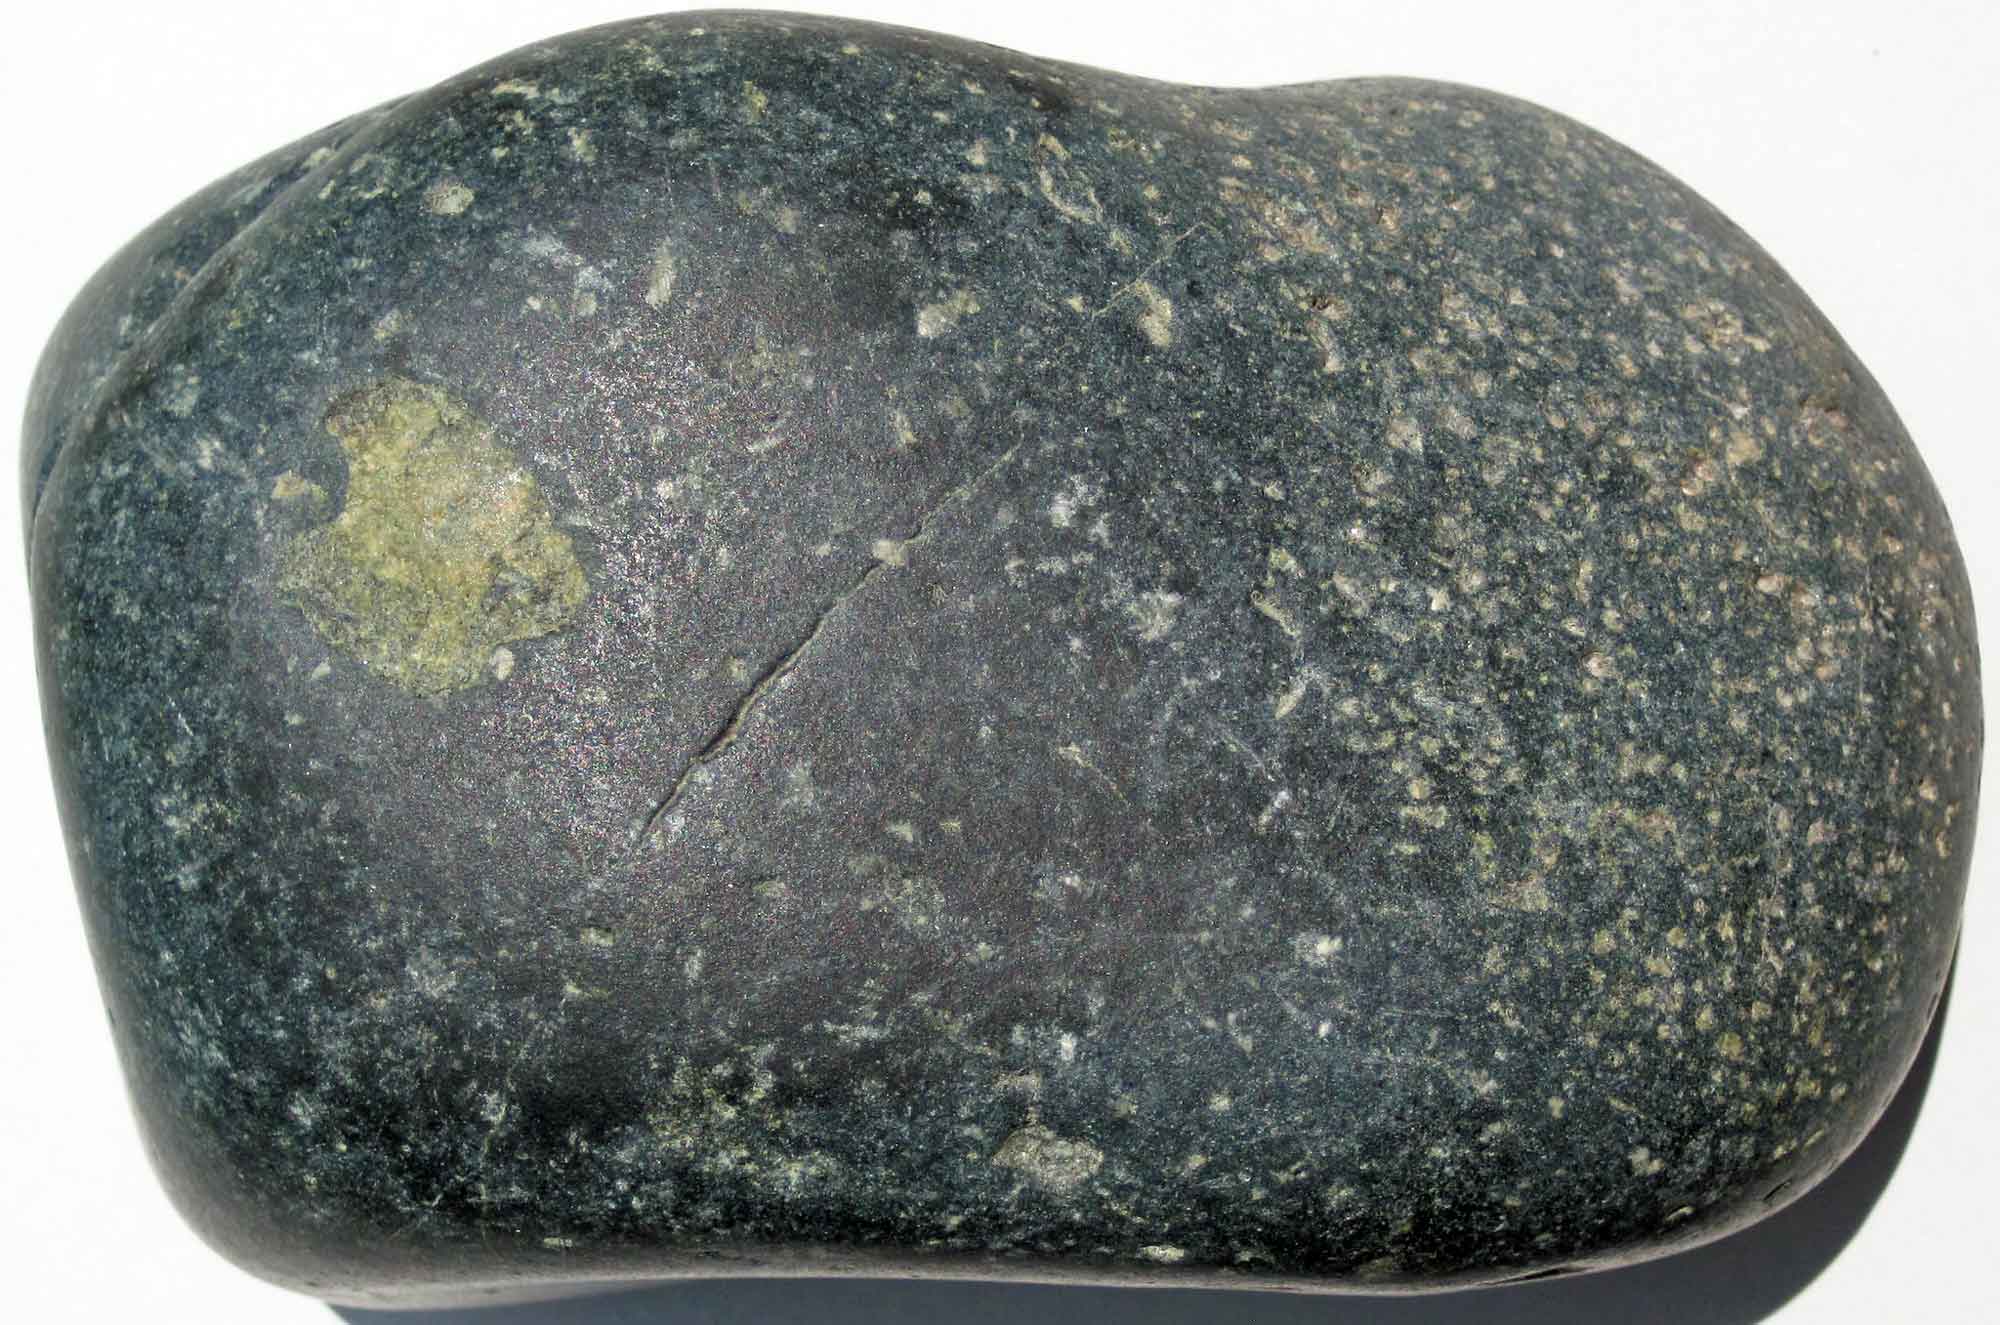 Photograph of a sample of nephrite jade from Alaska.